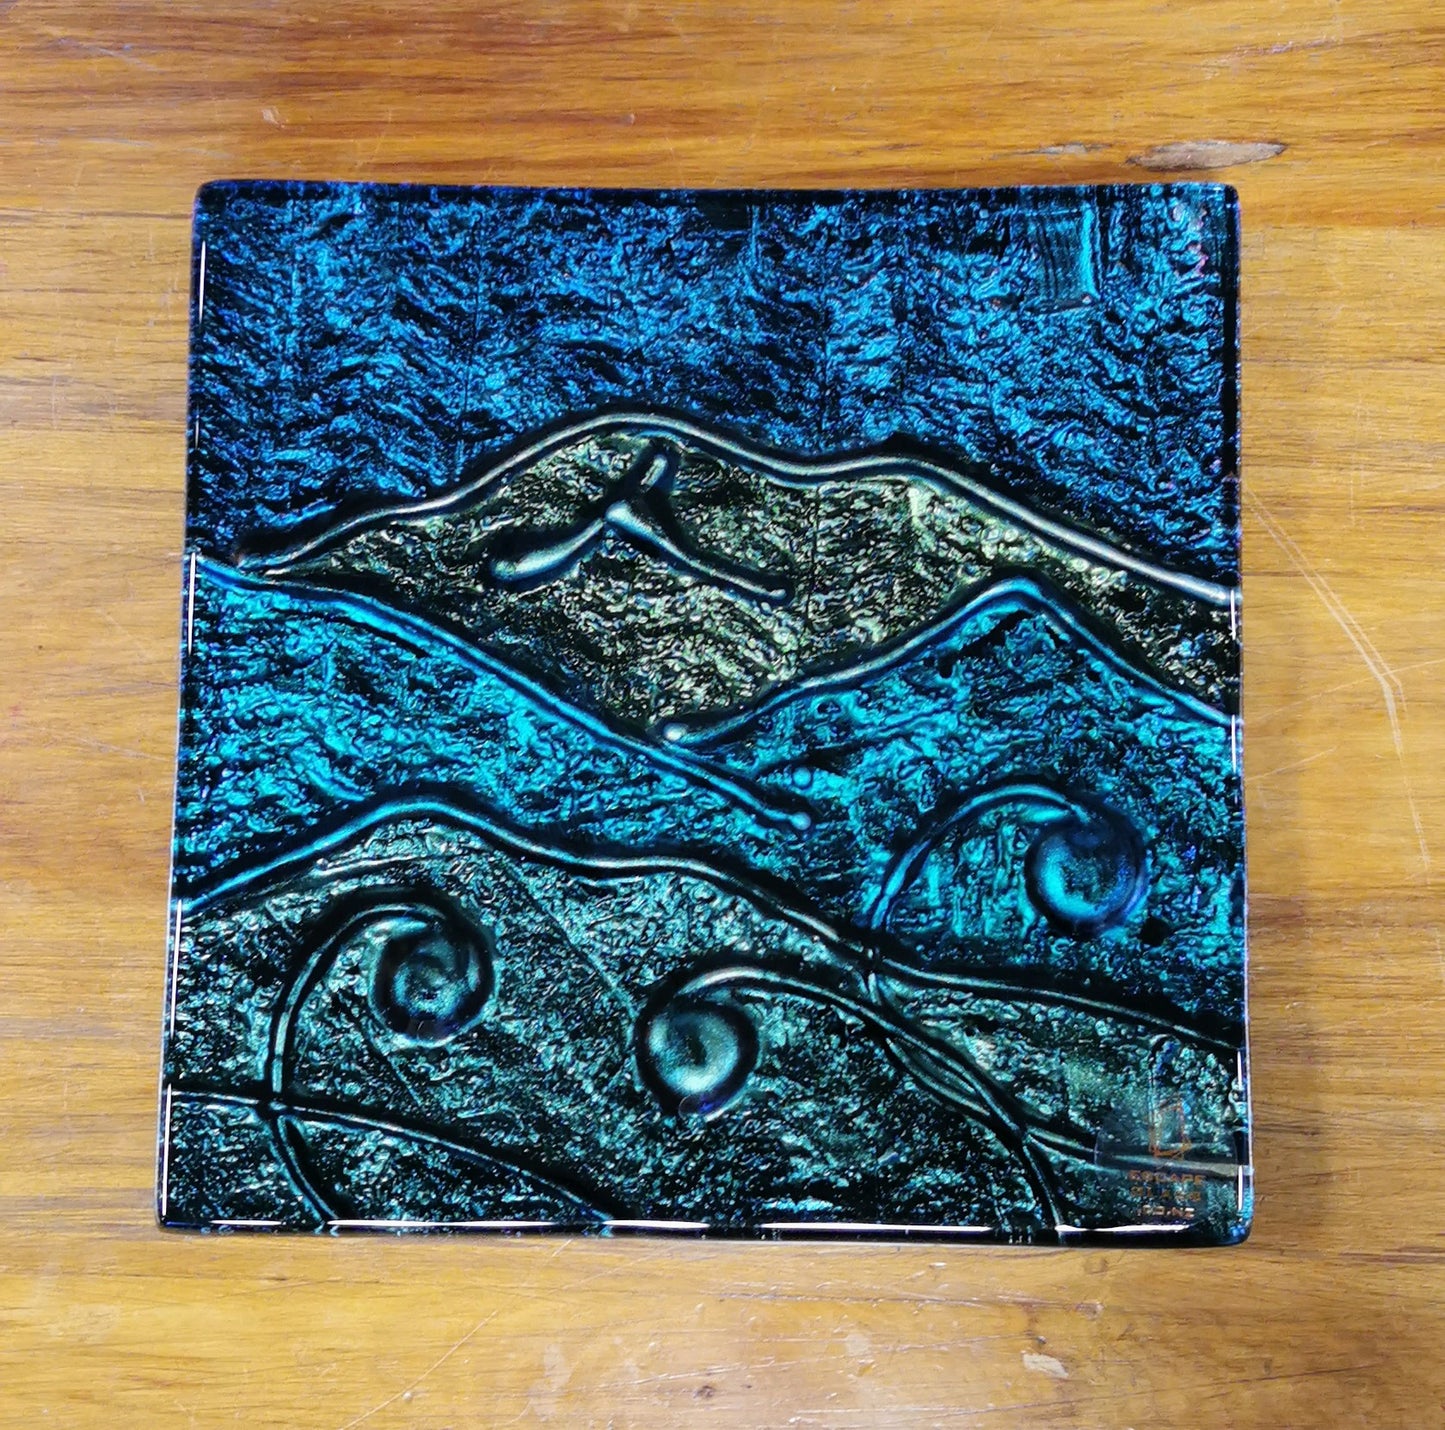 Handpainted Landscape with Koru - Small Square 20cm